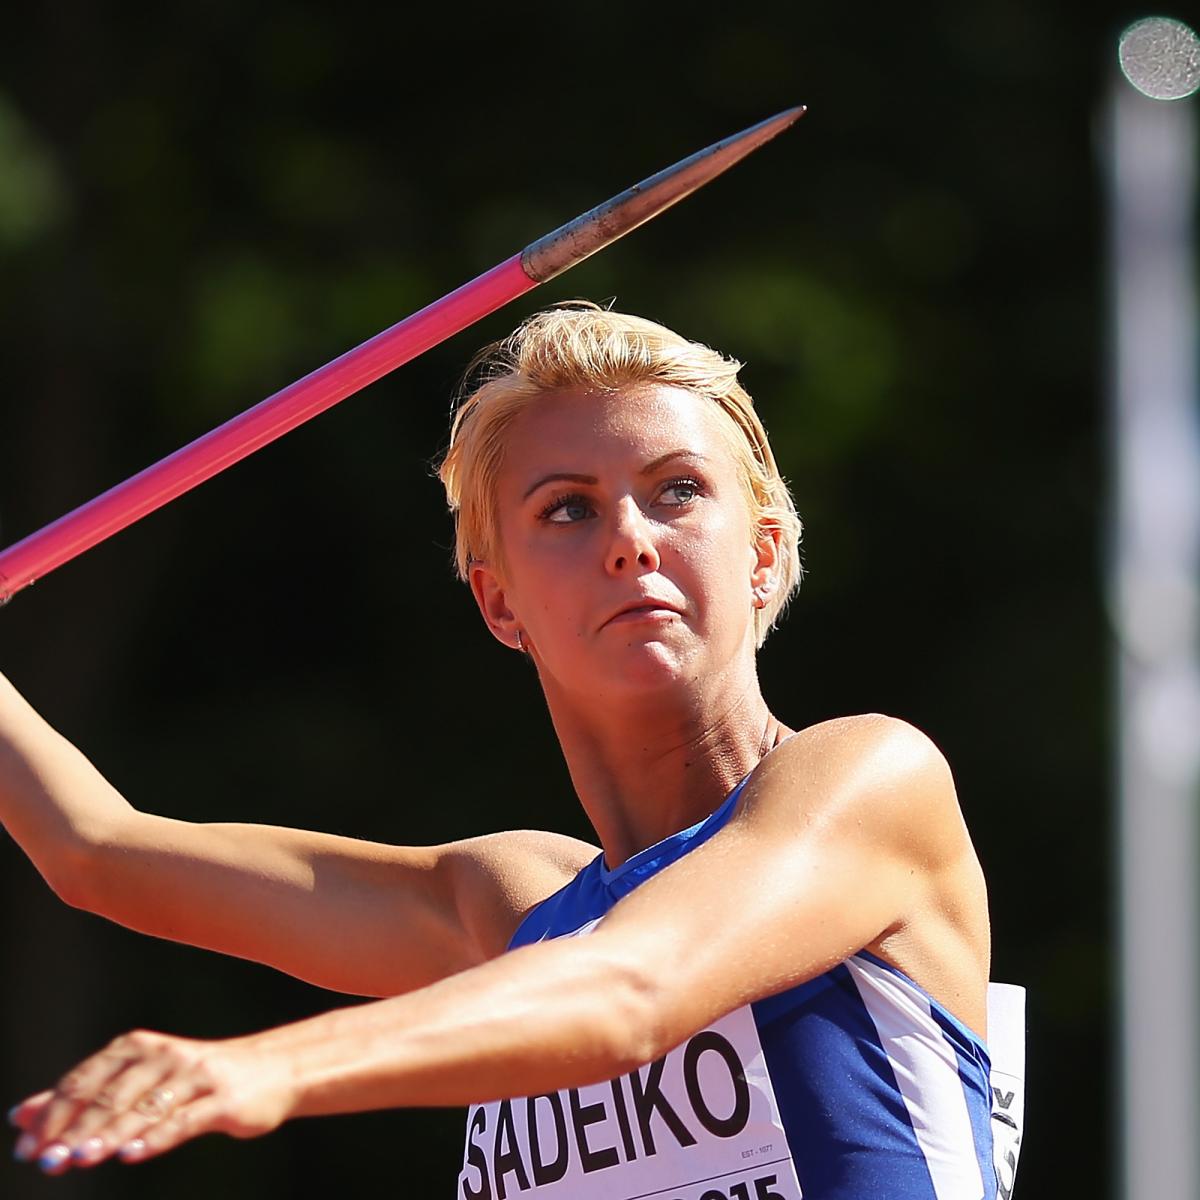 Grete Šadeiko - A Young Athlete's Path To Olympic Glory